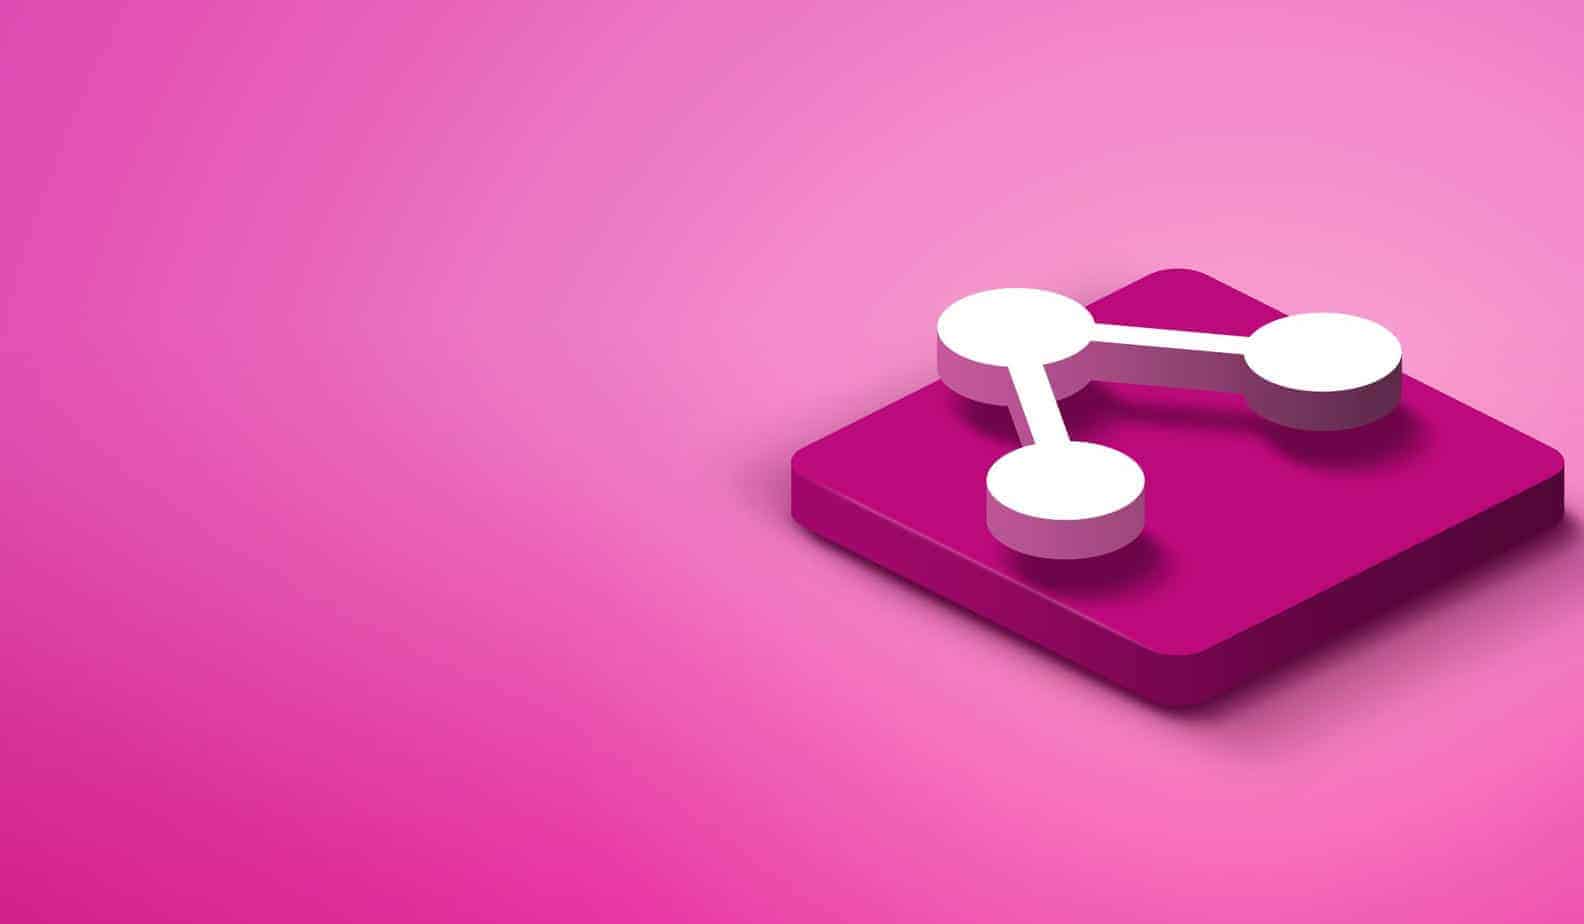 pink background with a white connection icon over a pink square